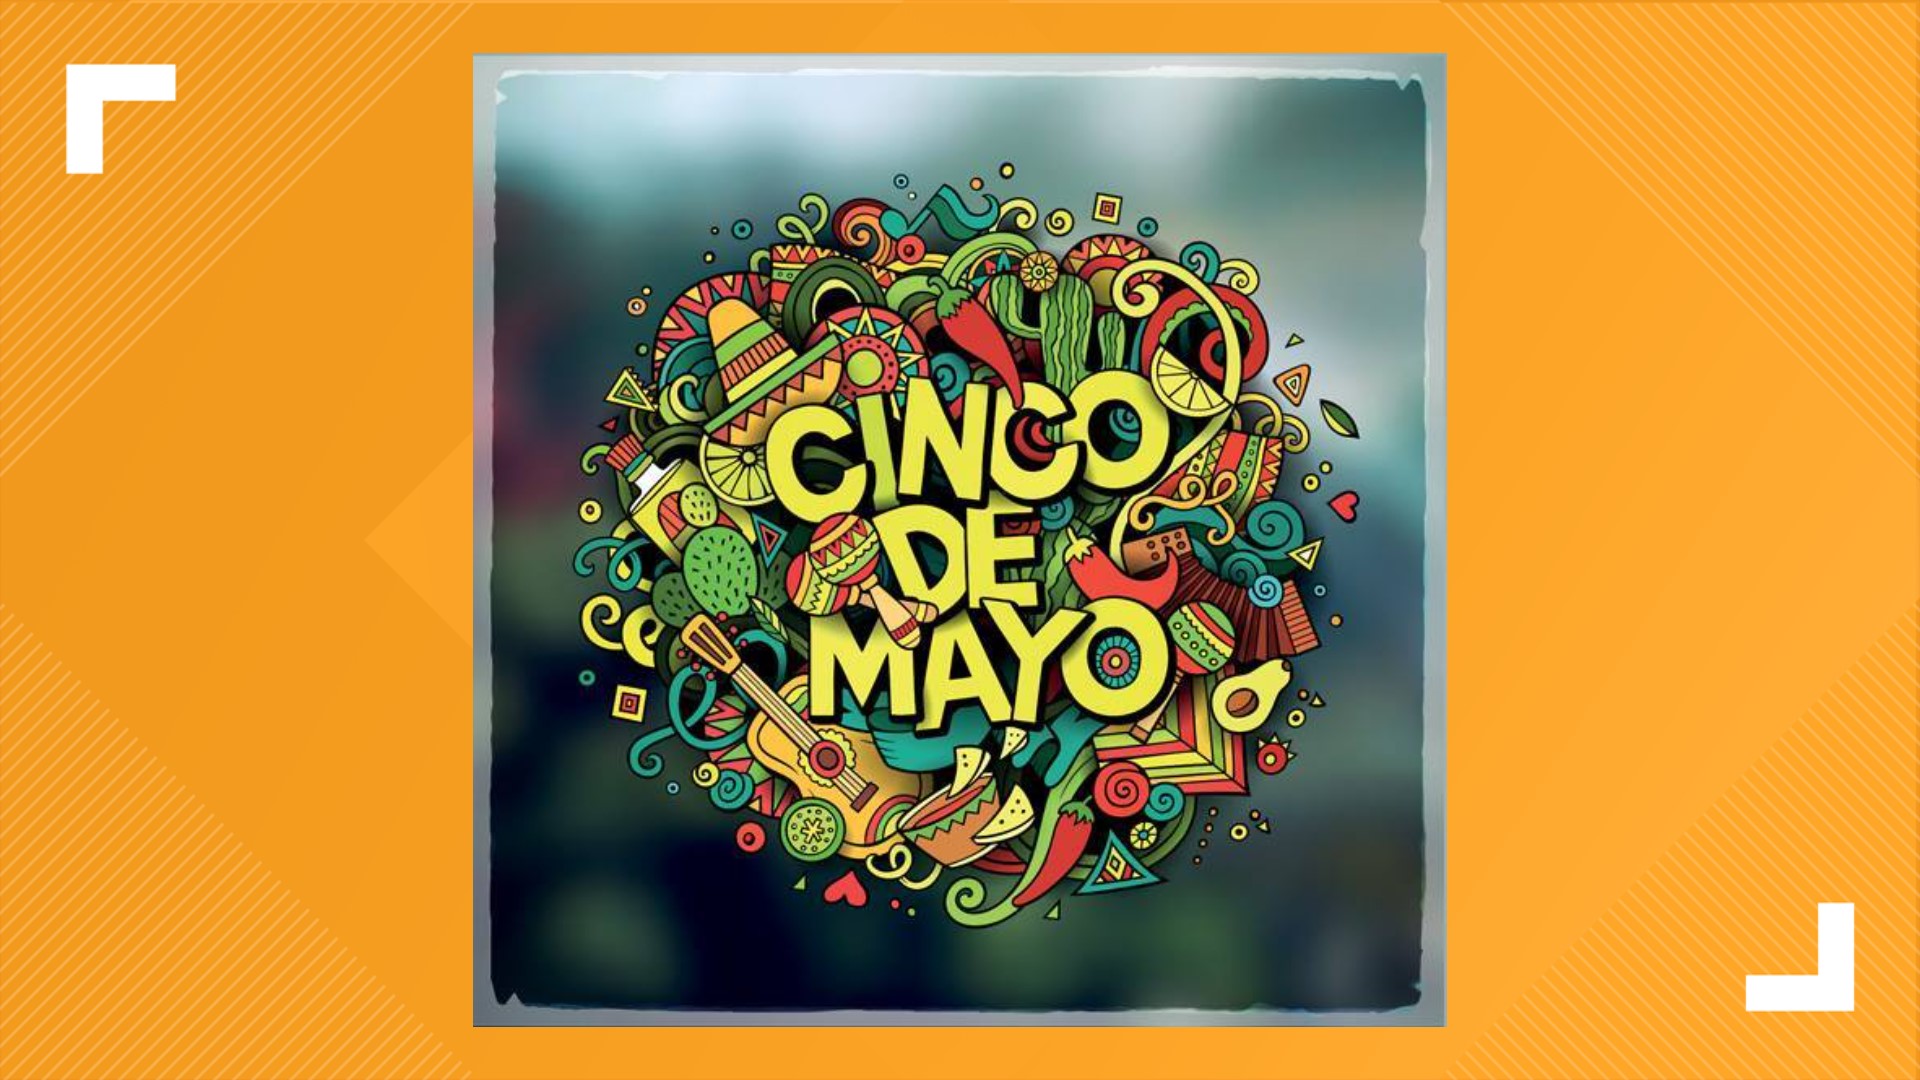 Cinco de Mayo is coming up, and we at FOX43 have compiled a list of deals that will make it all the more fun to celebrate.